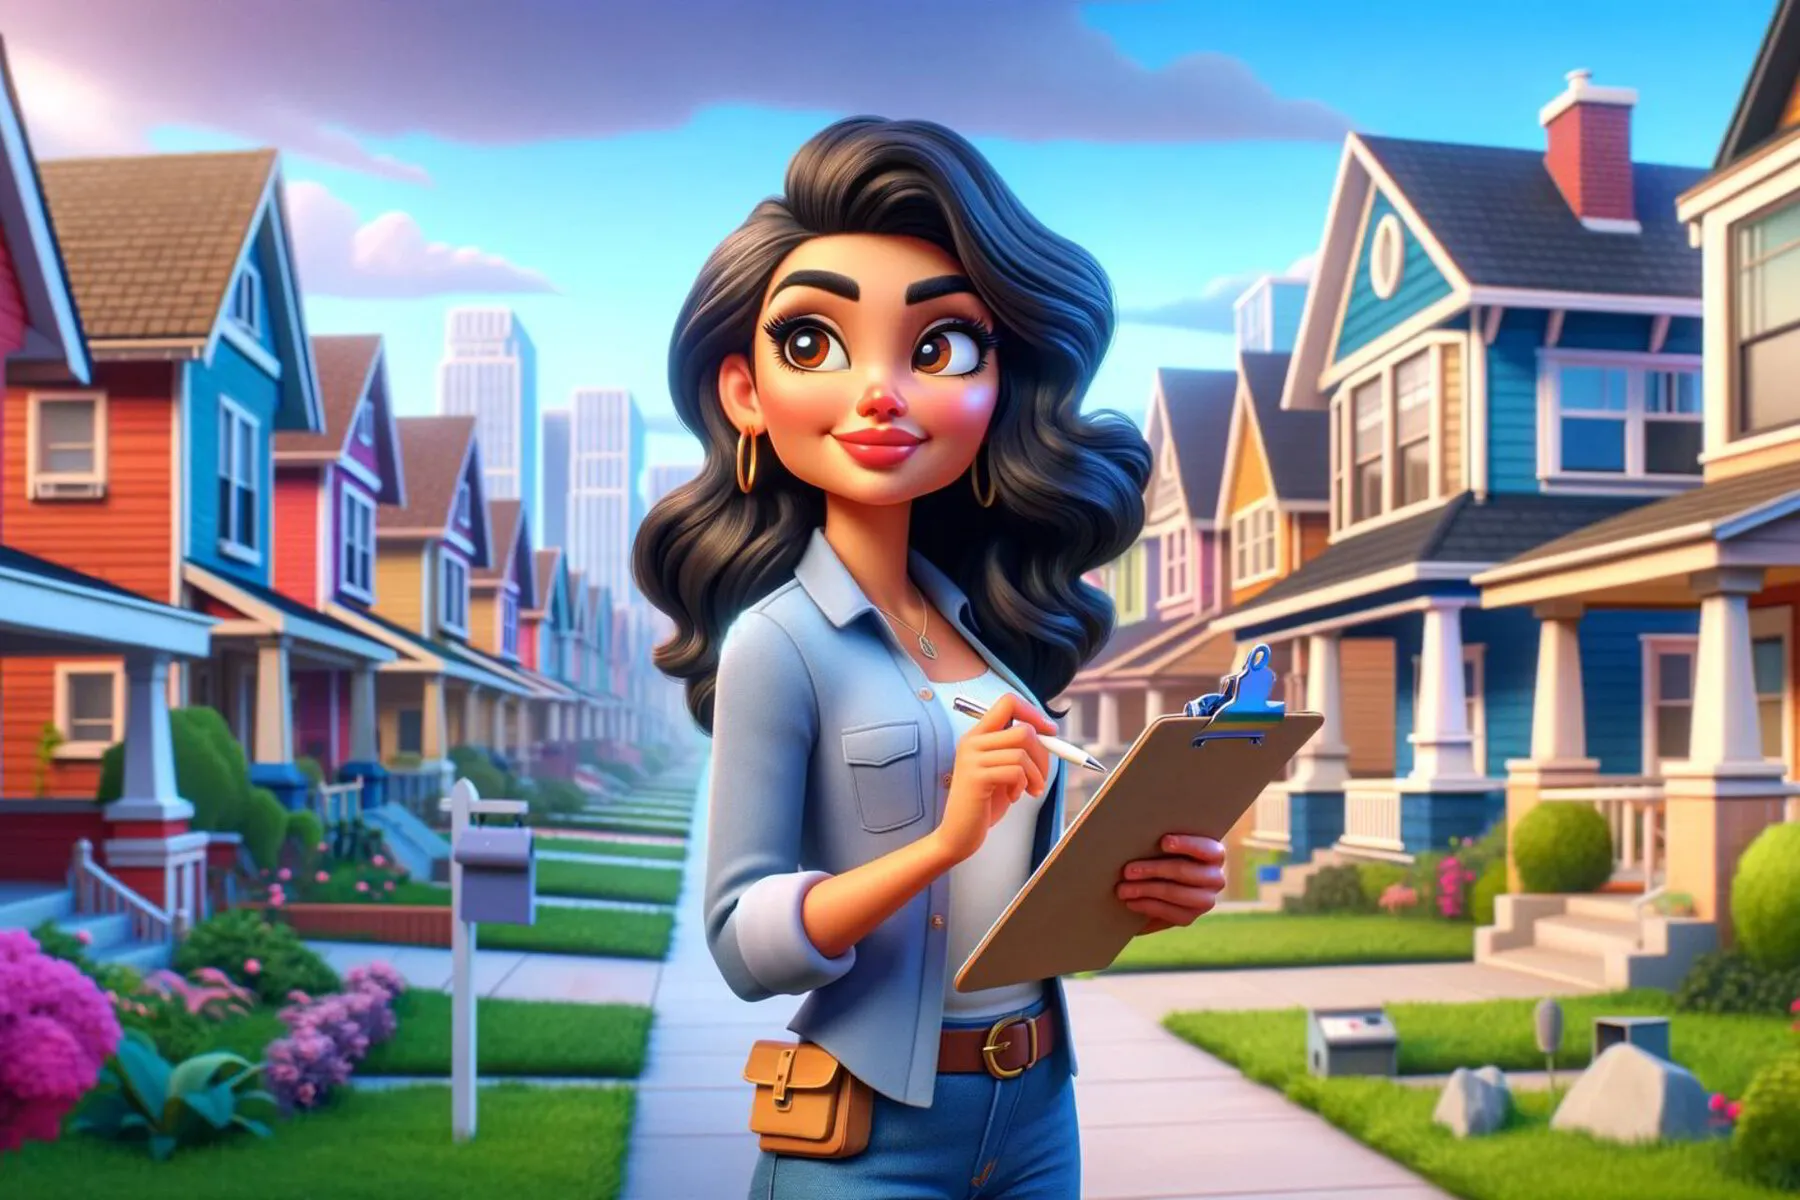 savvy house flipper, a Hispanic woman in her 30s, searching for the perfect house in a vibrant neighborhood